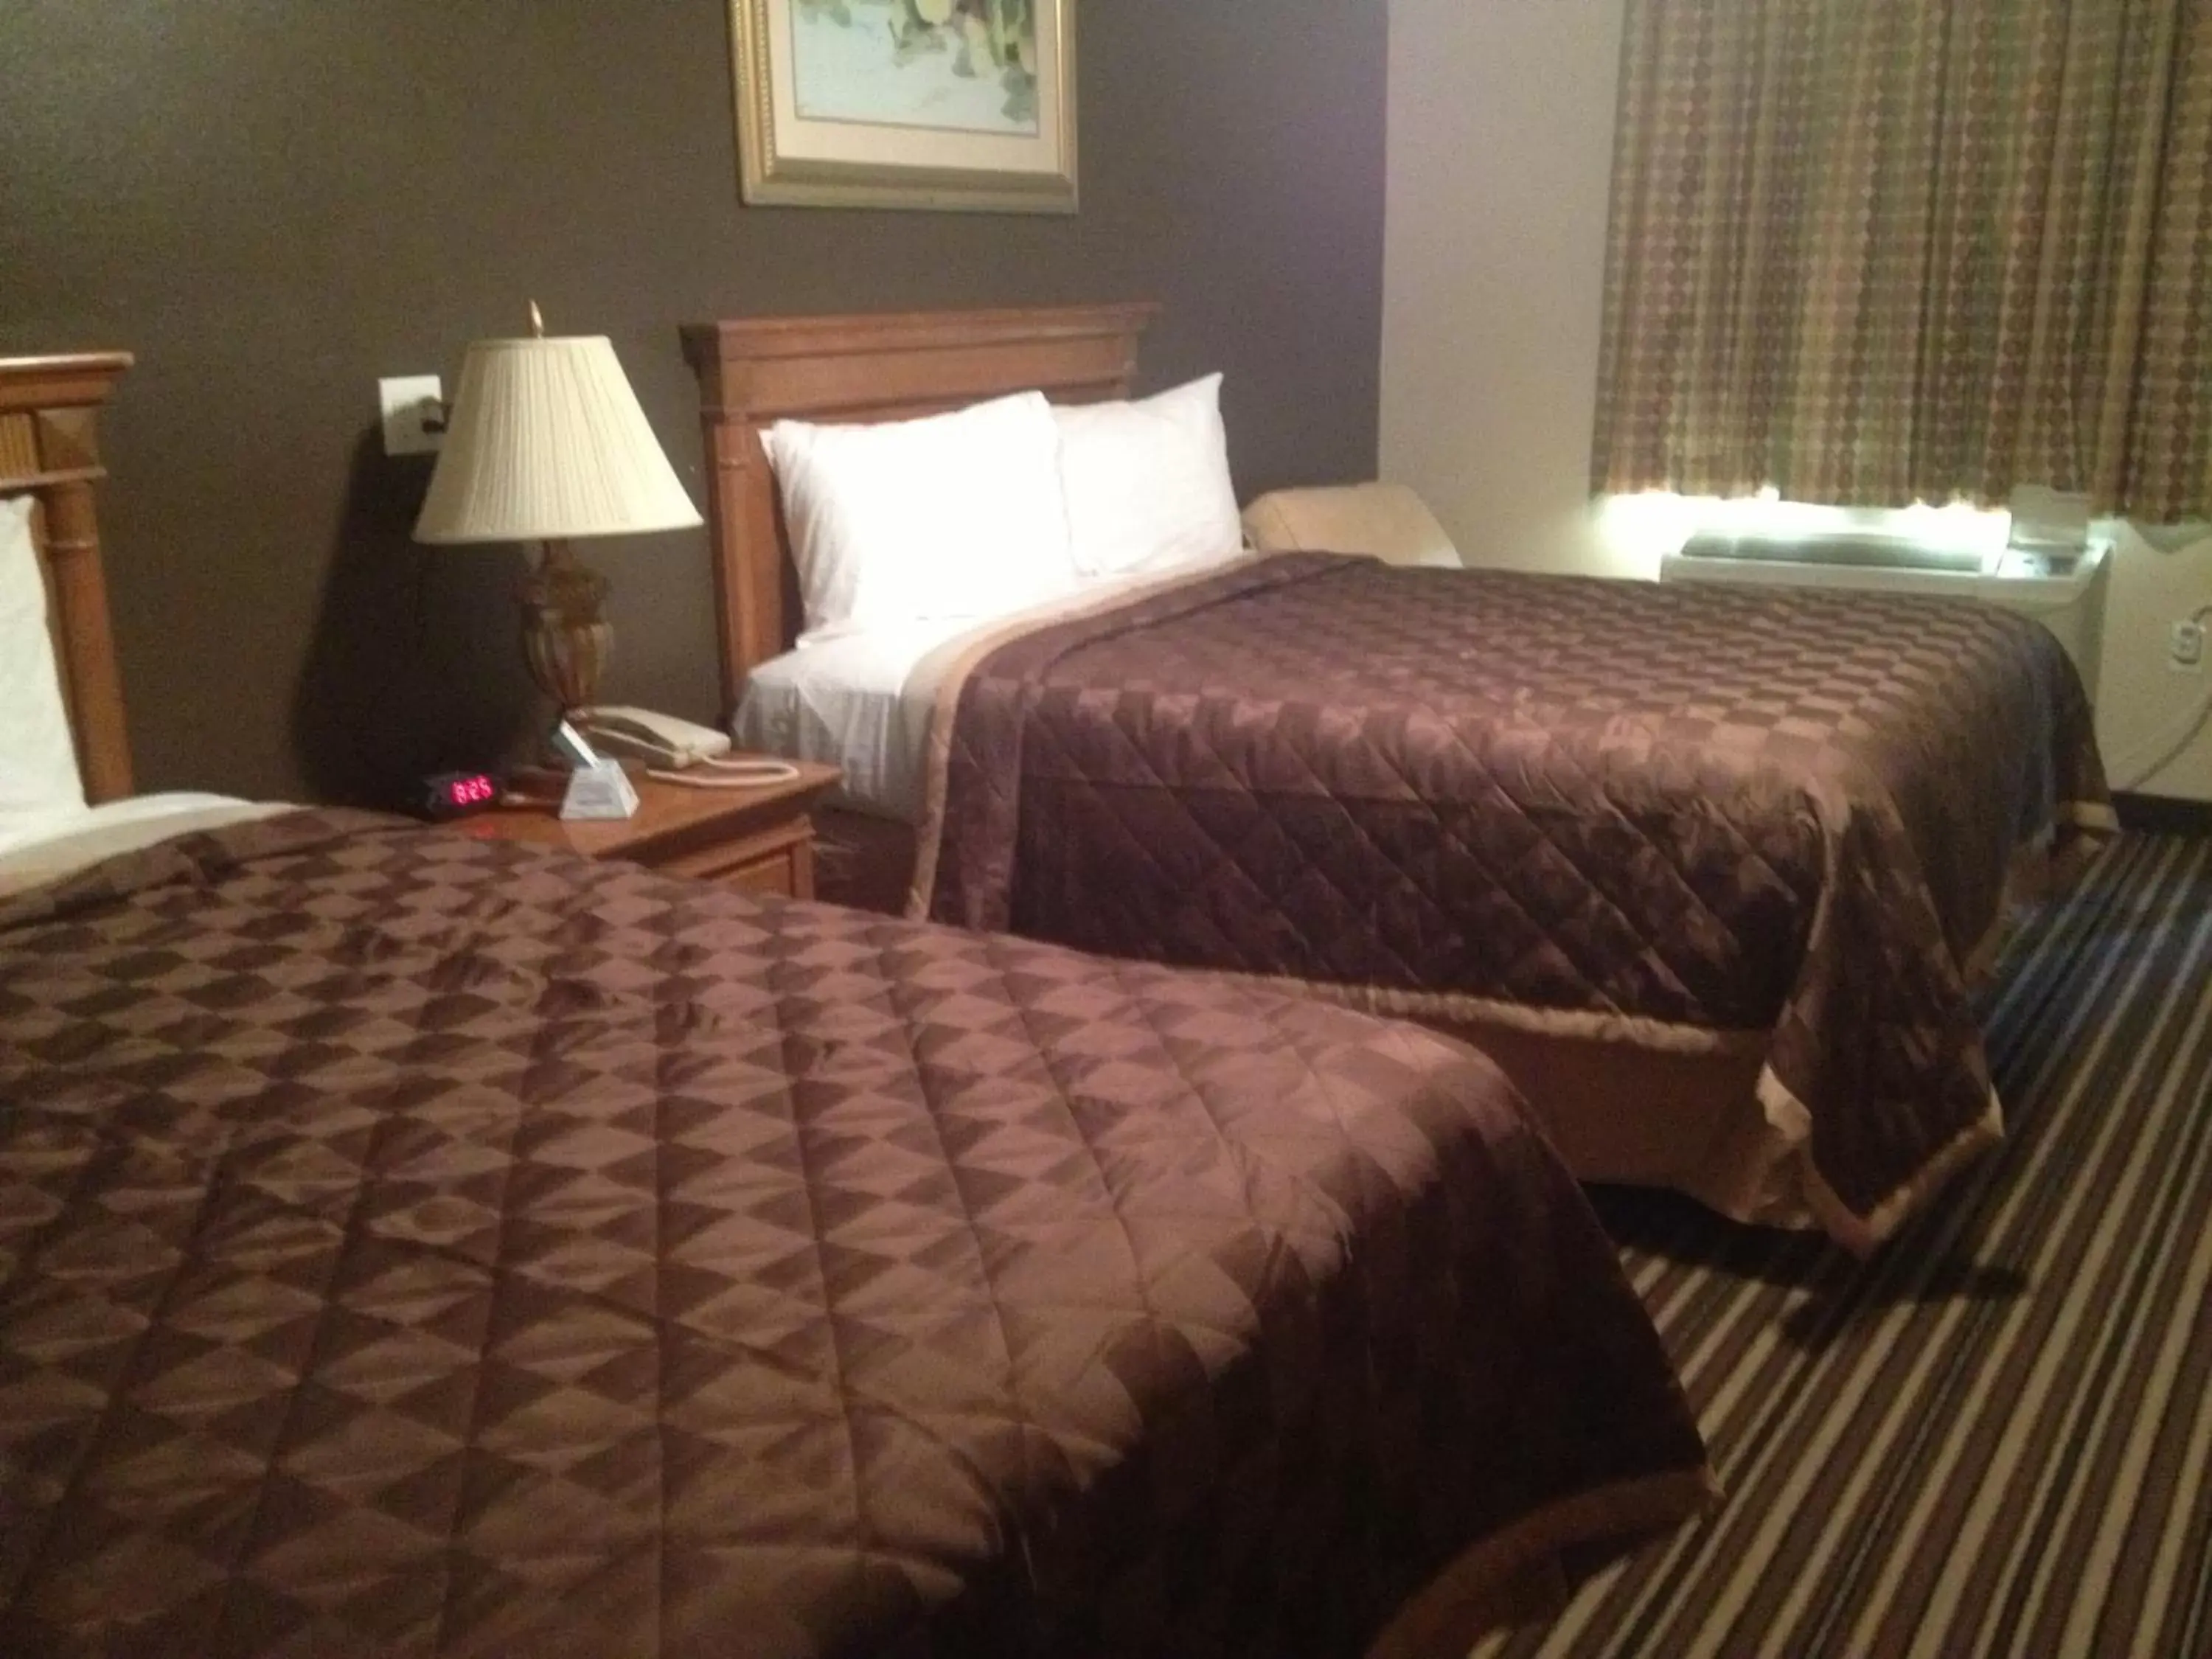 Decorative detail, Bed in Executive Inn Snyder